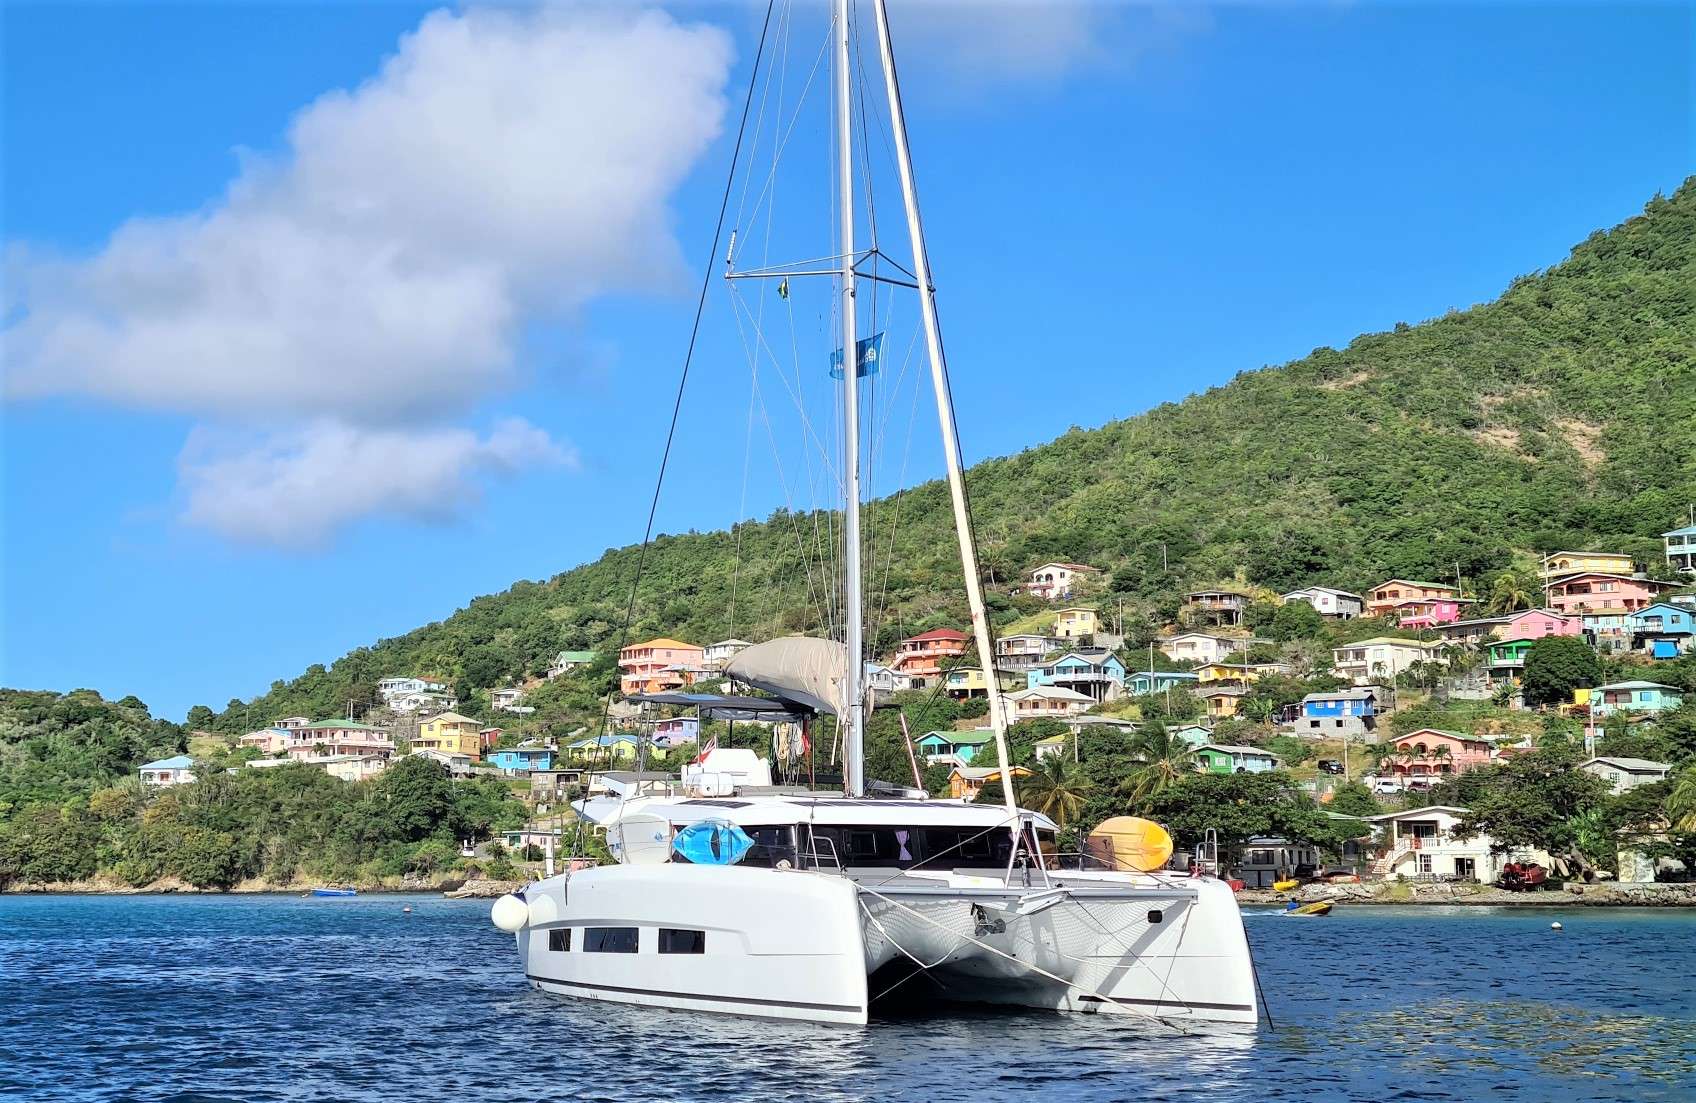 Neuroseas is a Dufour Catamaran built 2020, available for charter in the Grenadines and Grenada.

She can accommodate 8 people onboard. There are three queen berths ensuite and one bunk cabin suitable for children or one adult which is also ensuite. All the equipment onboard is new, with lots of storage space [including space for dive tanks as we can offer diving with a local dive guide onboard], large 25 HP tender for water sports and multiple sunbathing decks including the spacious flybridge.

Waking up with the perfect view out of the big windows creates the special ambience in each cabin.  The crew also offer full cabin service including linen changes, turn down and towels replacement.

The cockpit area is very spacious and up to 8 people can be seated easily for breakfast, lunch or dinner. Or do you prefer an evening dance? &ndash; The lights will be dimmed, and the captain&acute;s guitar is ready.